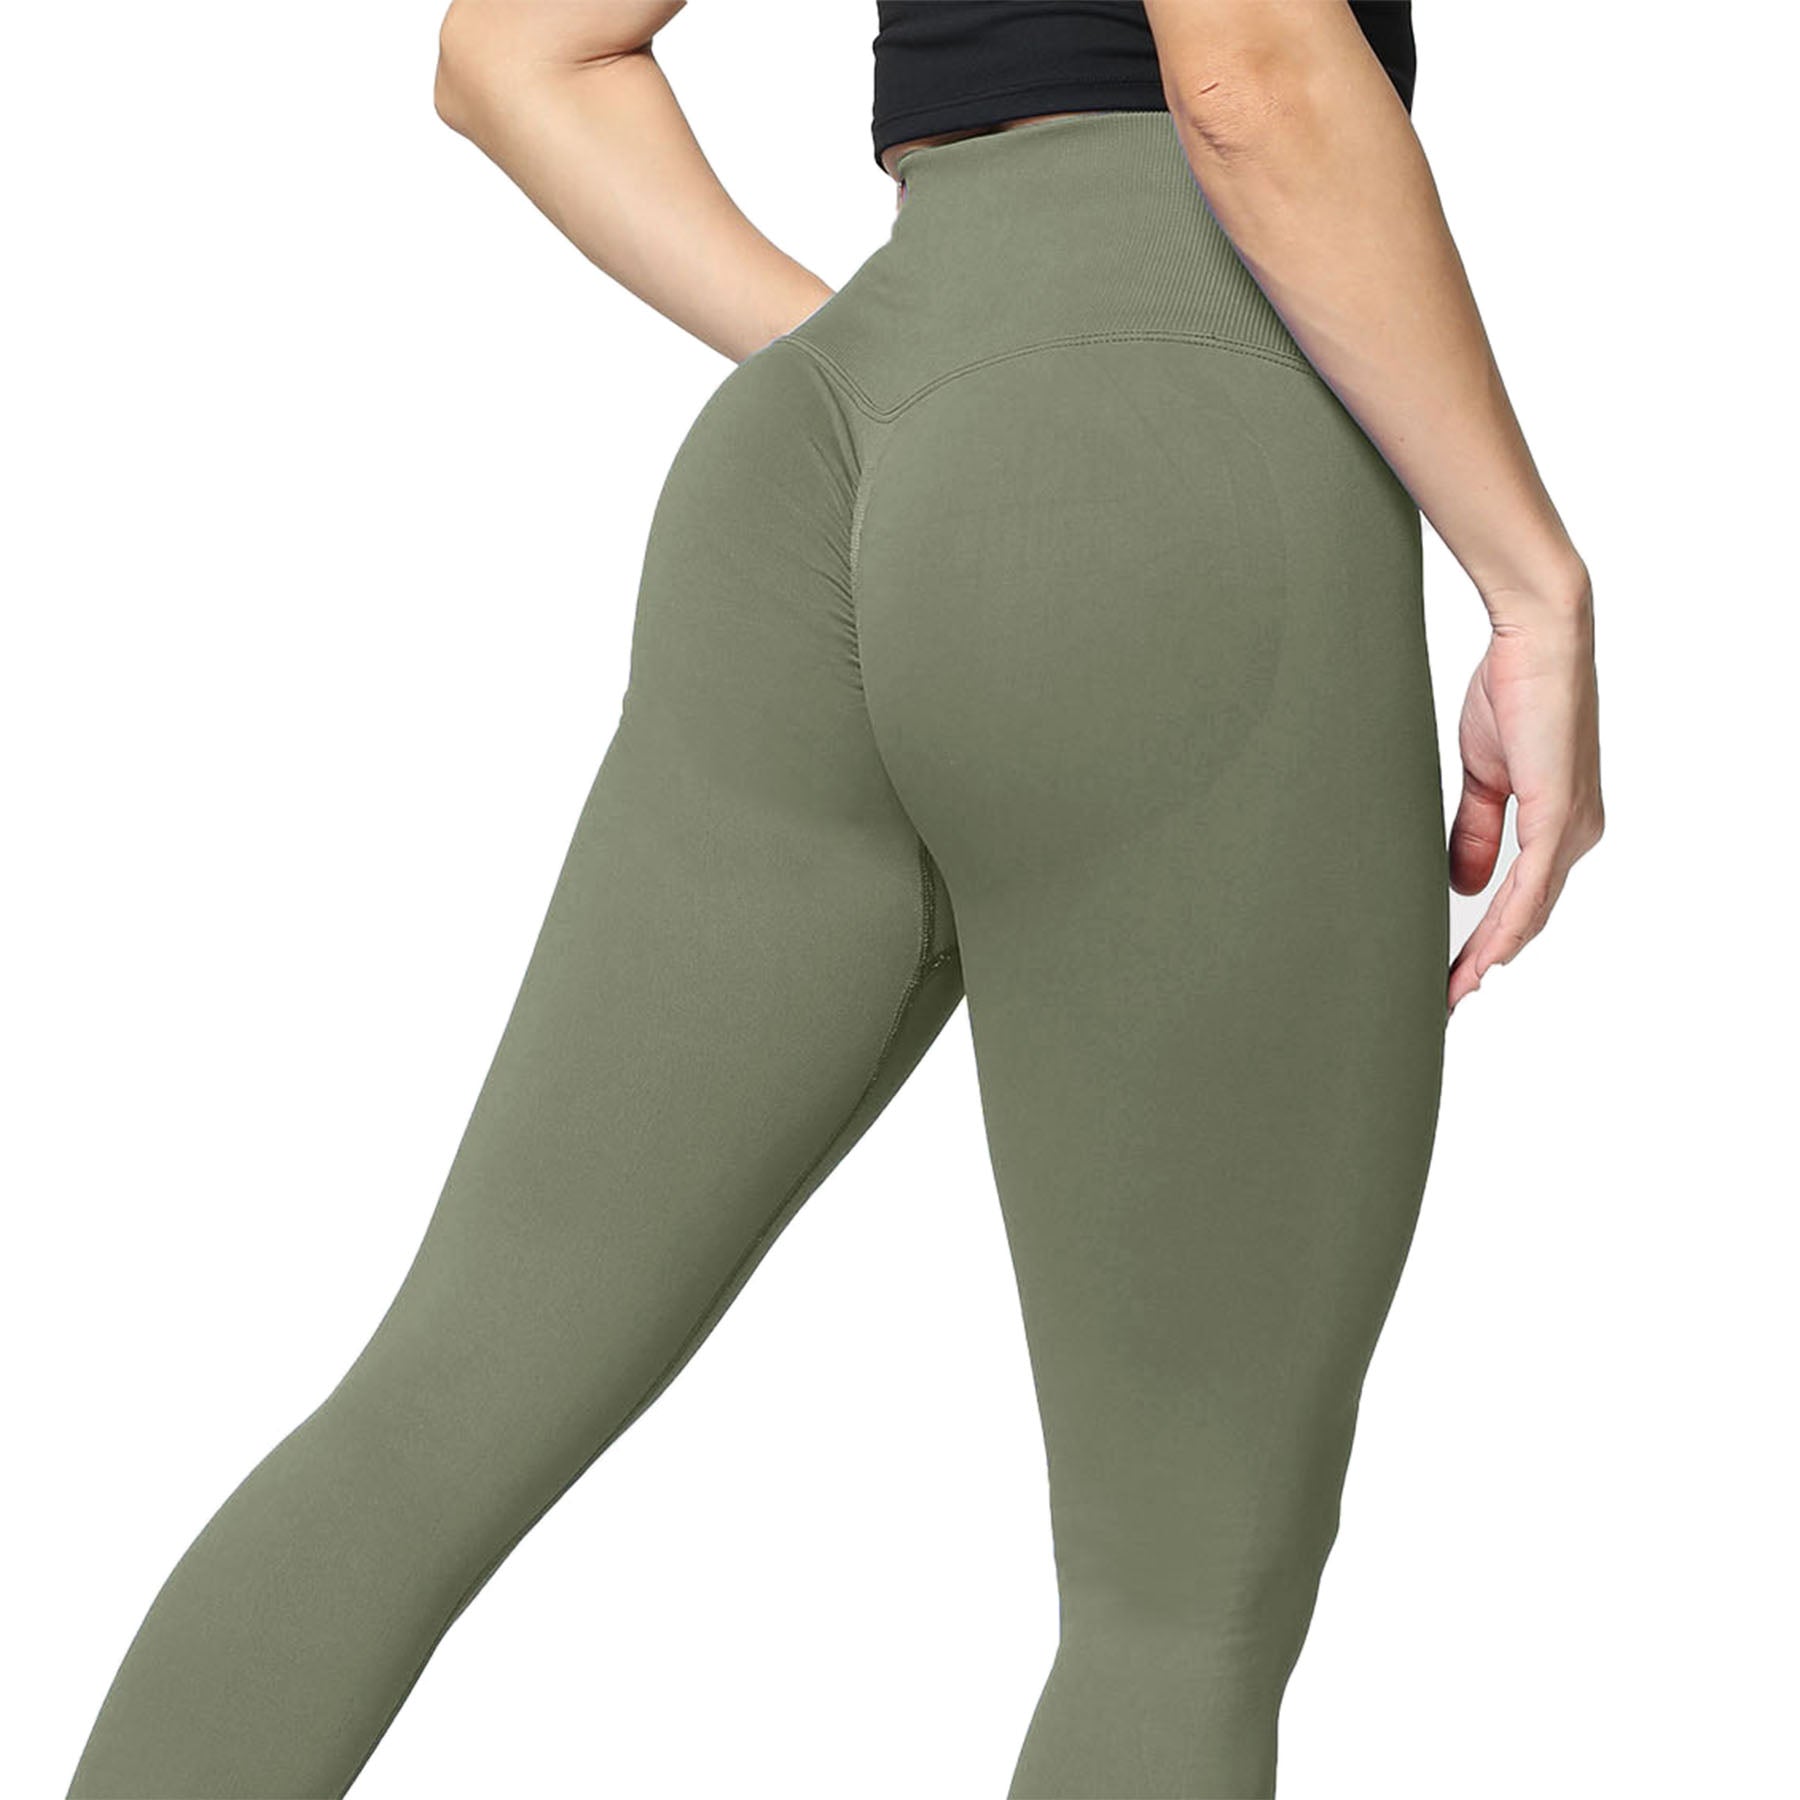 Aoxjox Women's Scrunch Butt Lifting Seamless Leggings Booty High Waisted  Workout Yoga Pants, A Black, Small : Buy Online at Best Price in KSA - Souq  is now : Fashion